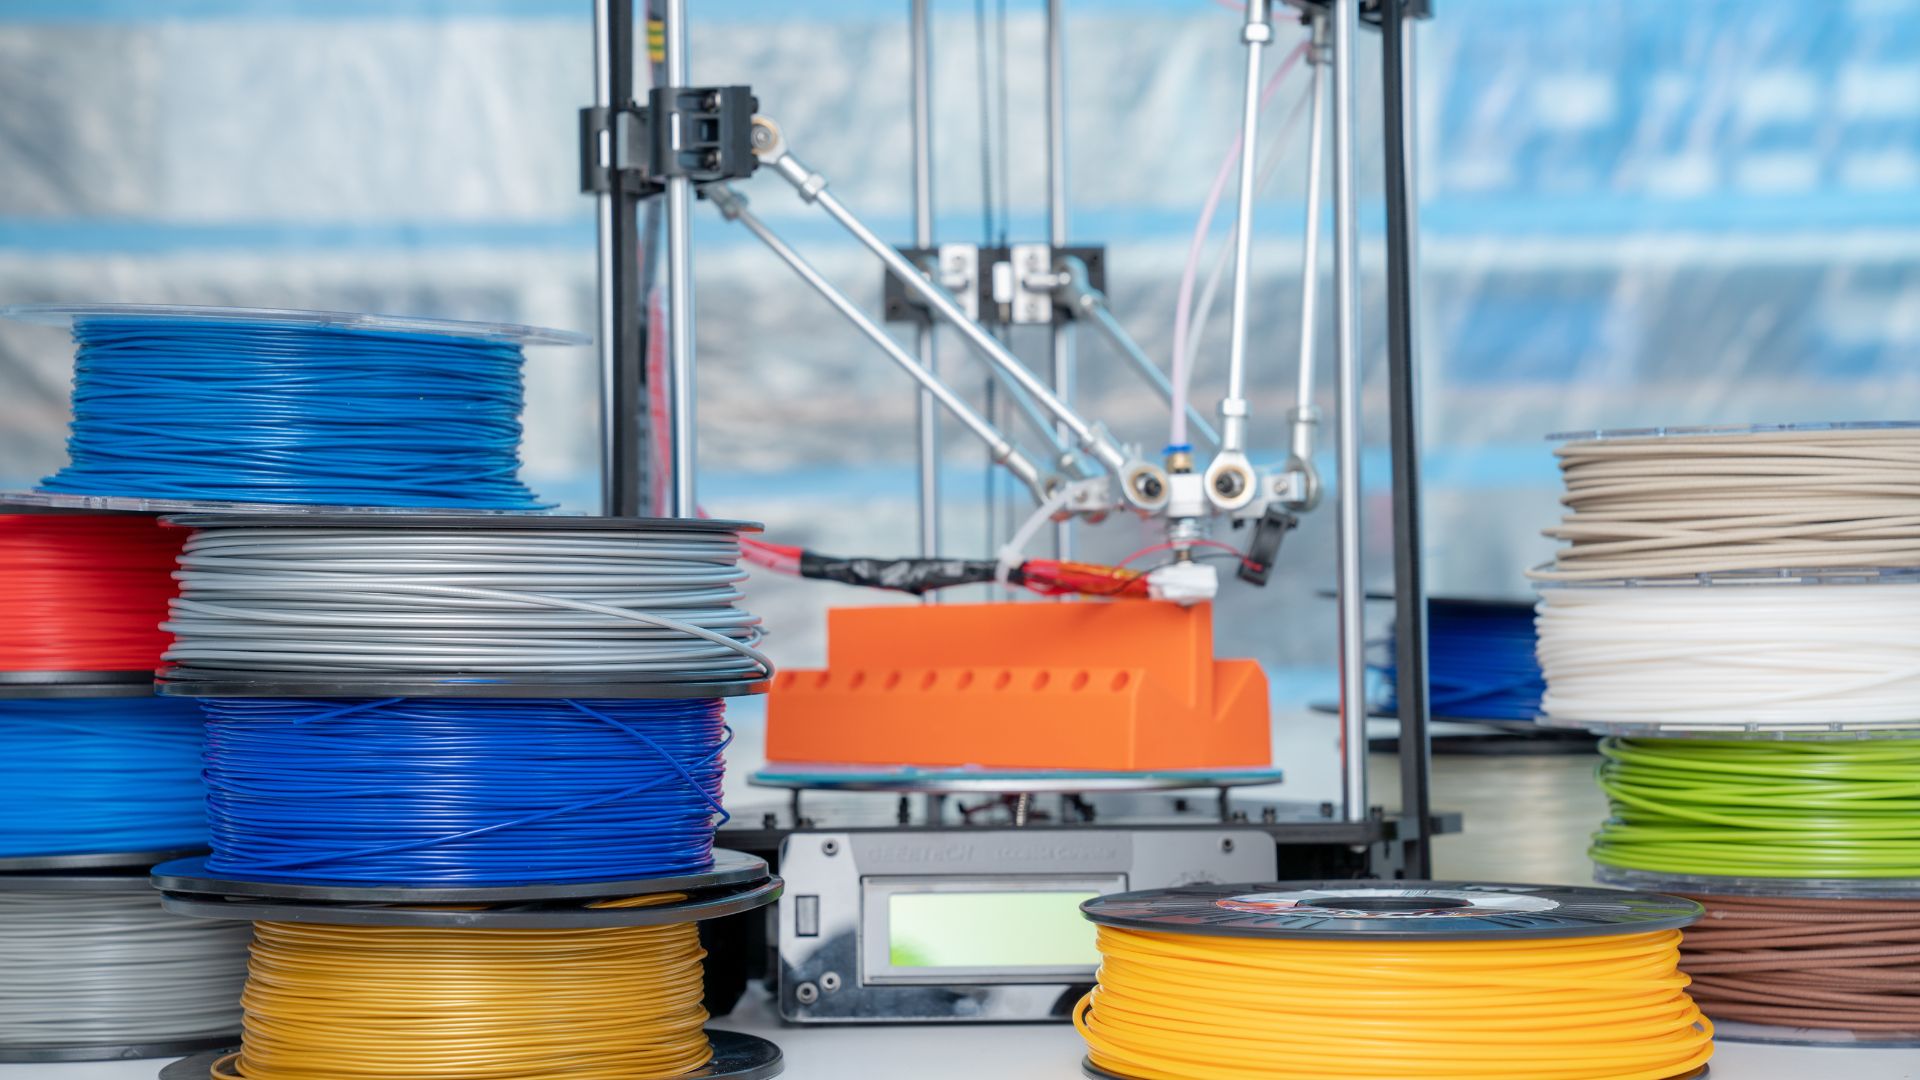 Tips for Preventing Filament Jams on Your 3D Printer